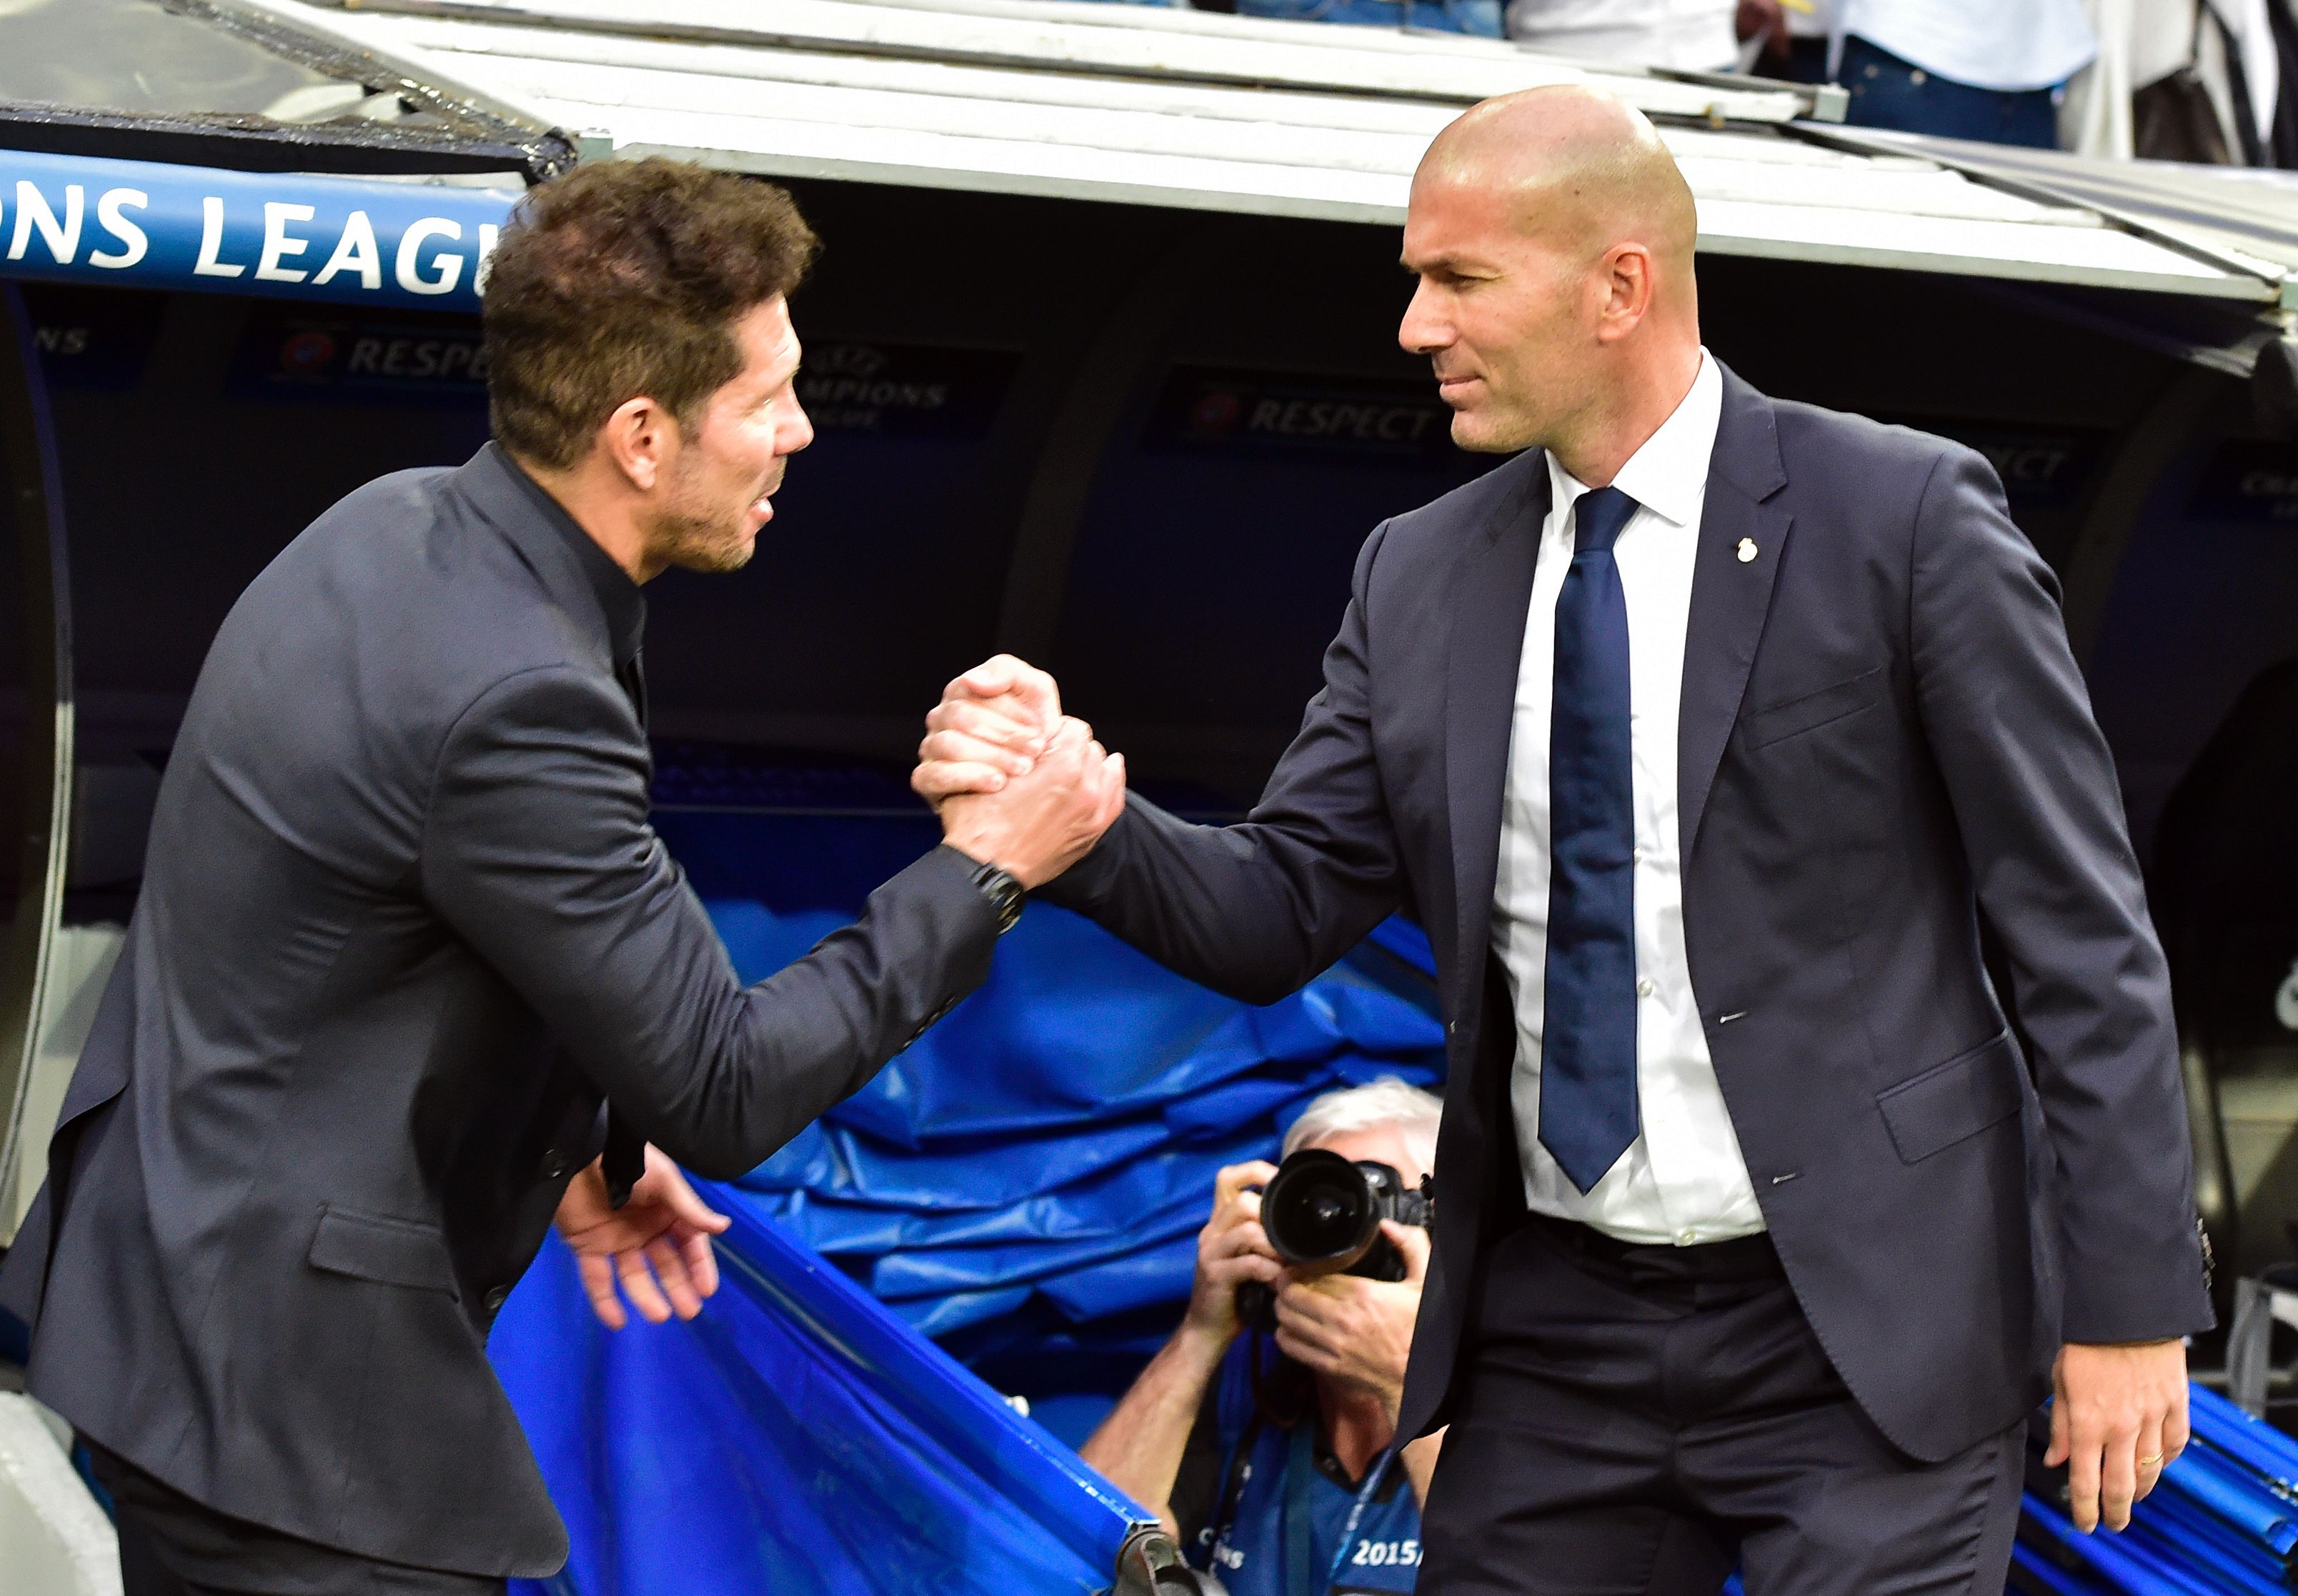 Atletico Madrid's Argentinian coach Diego Simeone (L) shakes hands with Real Madrid's French coach Zinedine Zidane beofre the UEFA Champions League semifinal first leg football match Real Madrid CF vs Club Atletico de Madrid at the Santiago Bernabeu stadium in Madrid, on May 2, 2017. / AFP PHOTO / GERARD JULIEN        (Photo credit should read GERARD JULIEN/AFP/Getty Images)